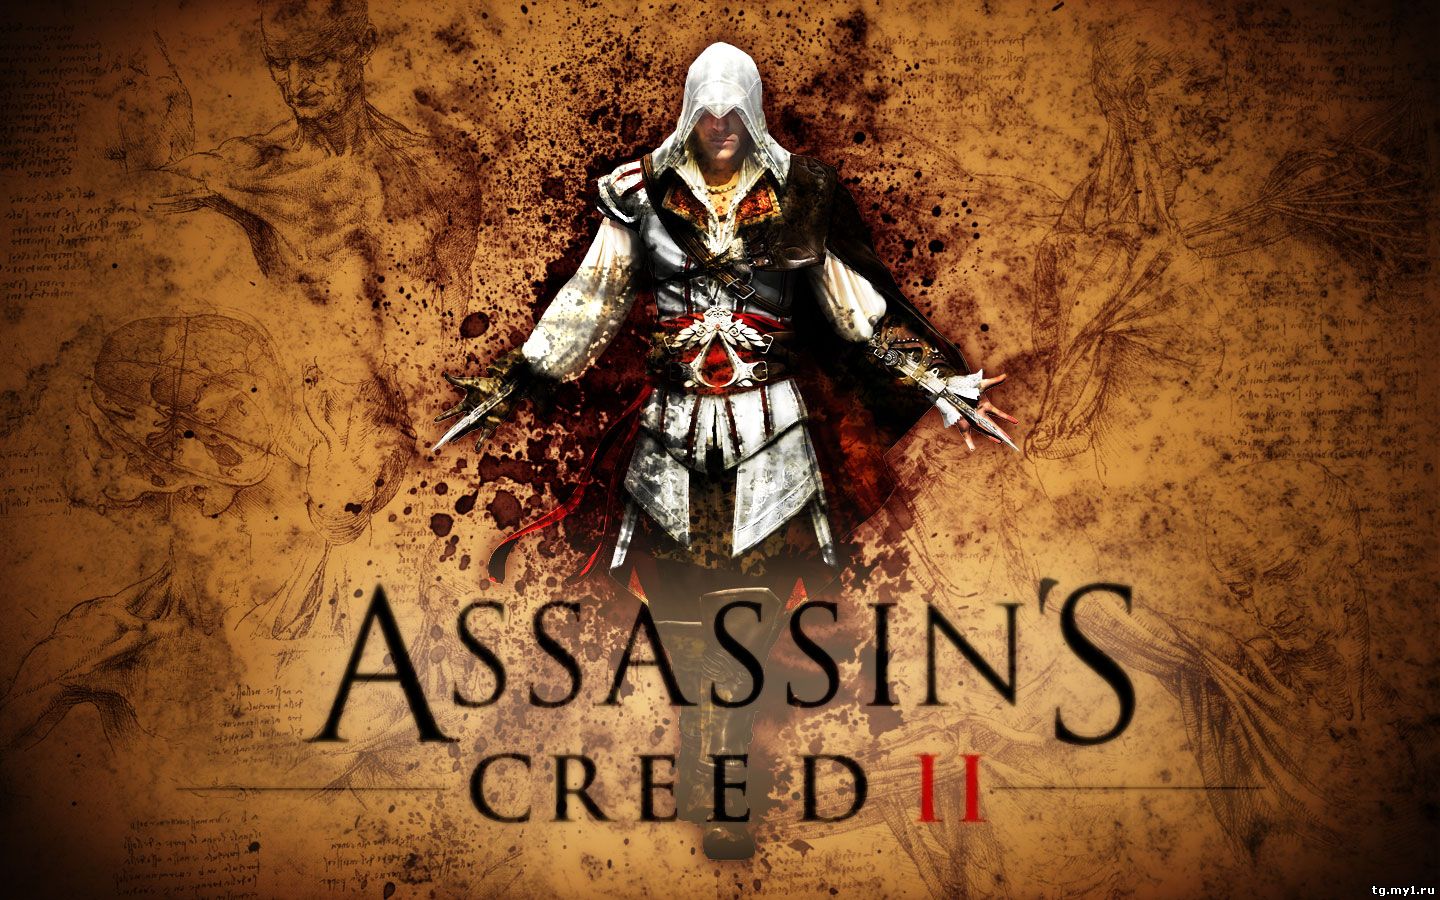 Steam assassin creed 2 deluxe фото 95